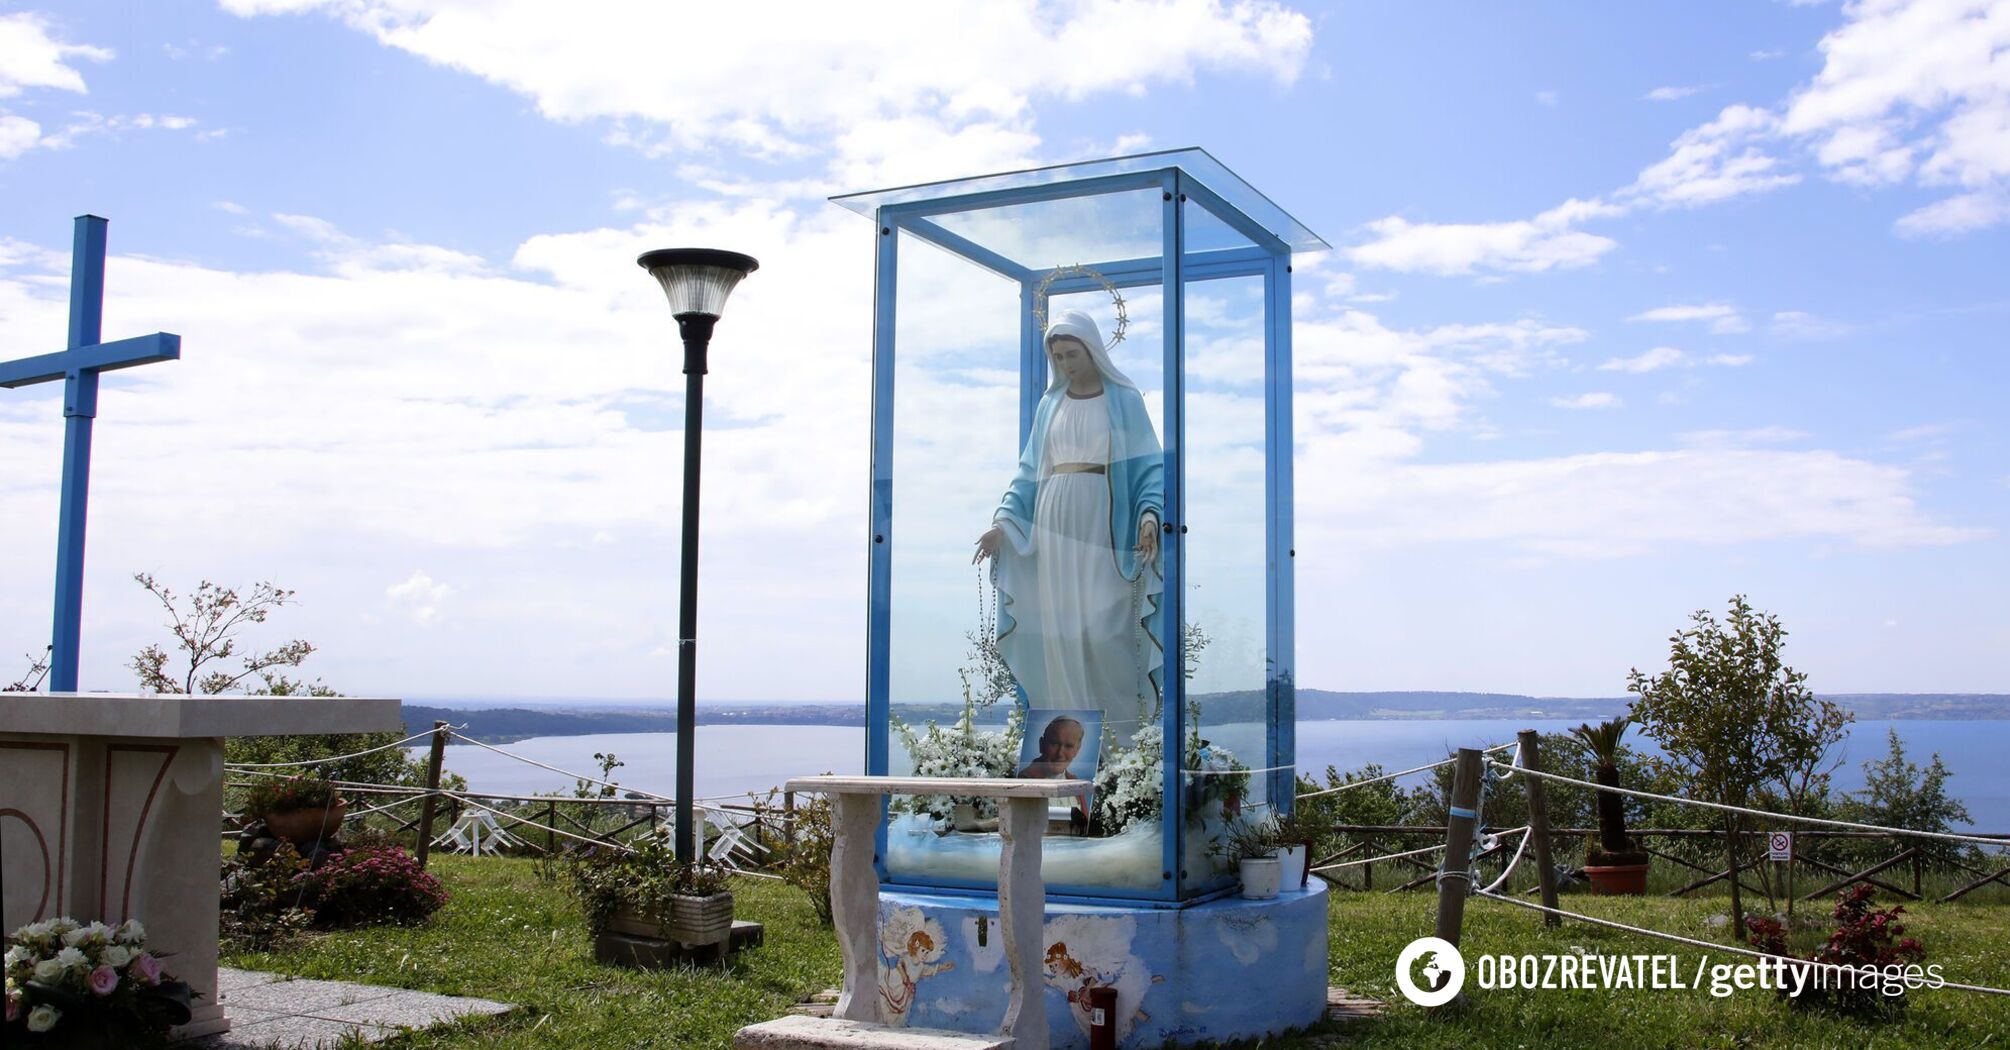 The Vatican has recognized the famous statue of the Virgin Mary 'crying blood' as a fake. Photo